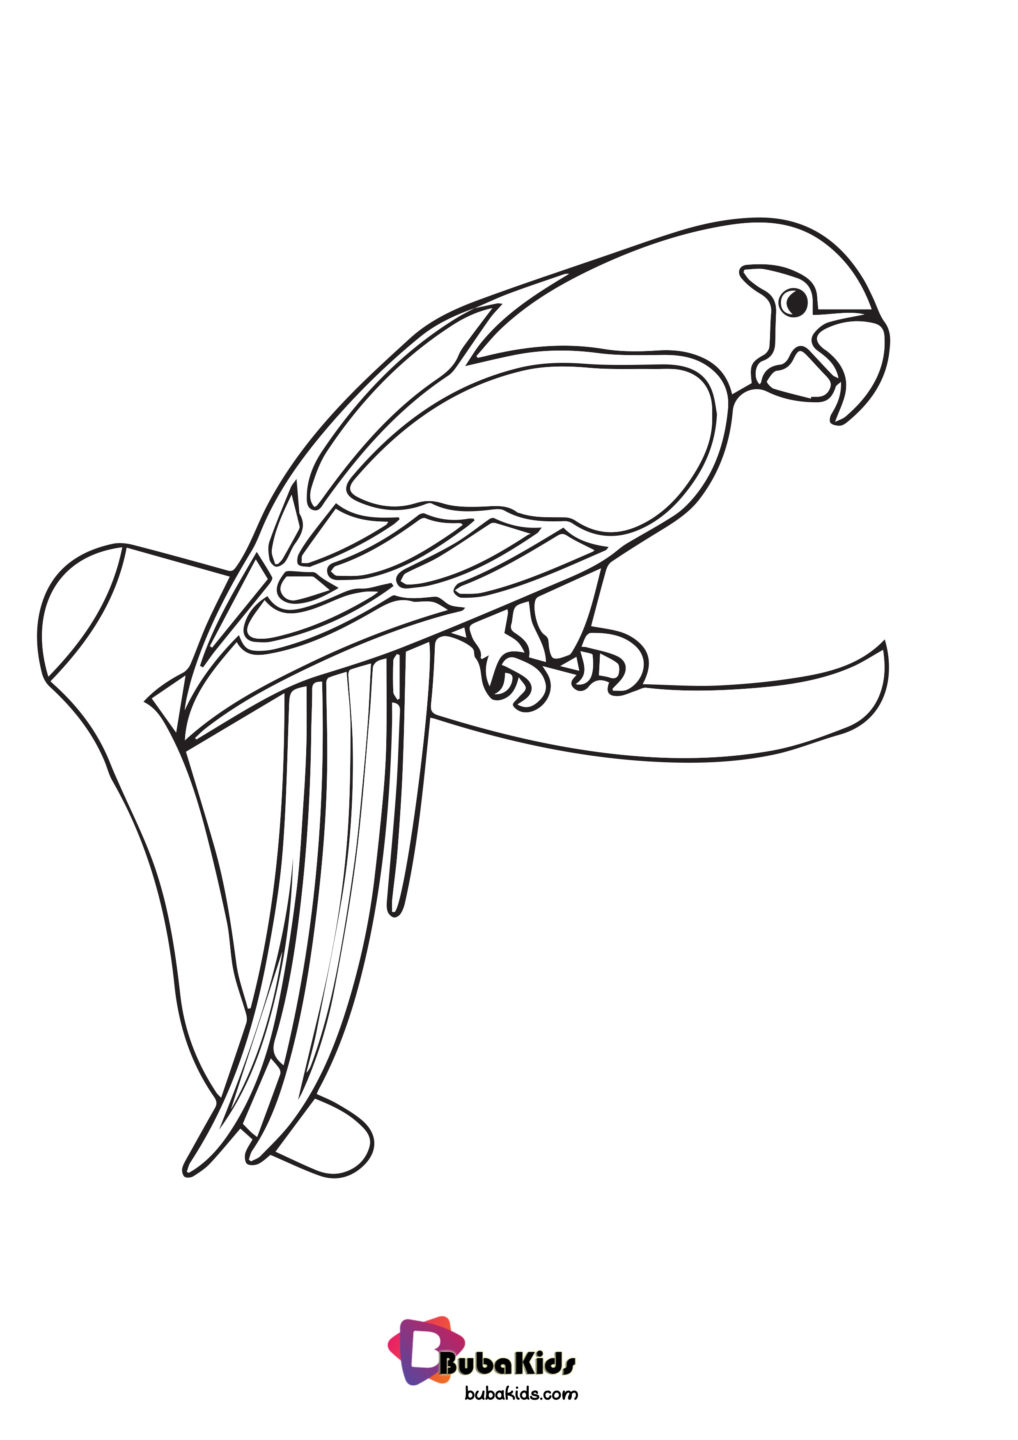 parrot animal coloring page for kids